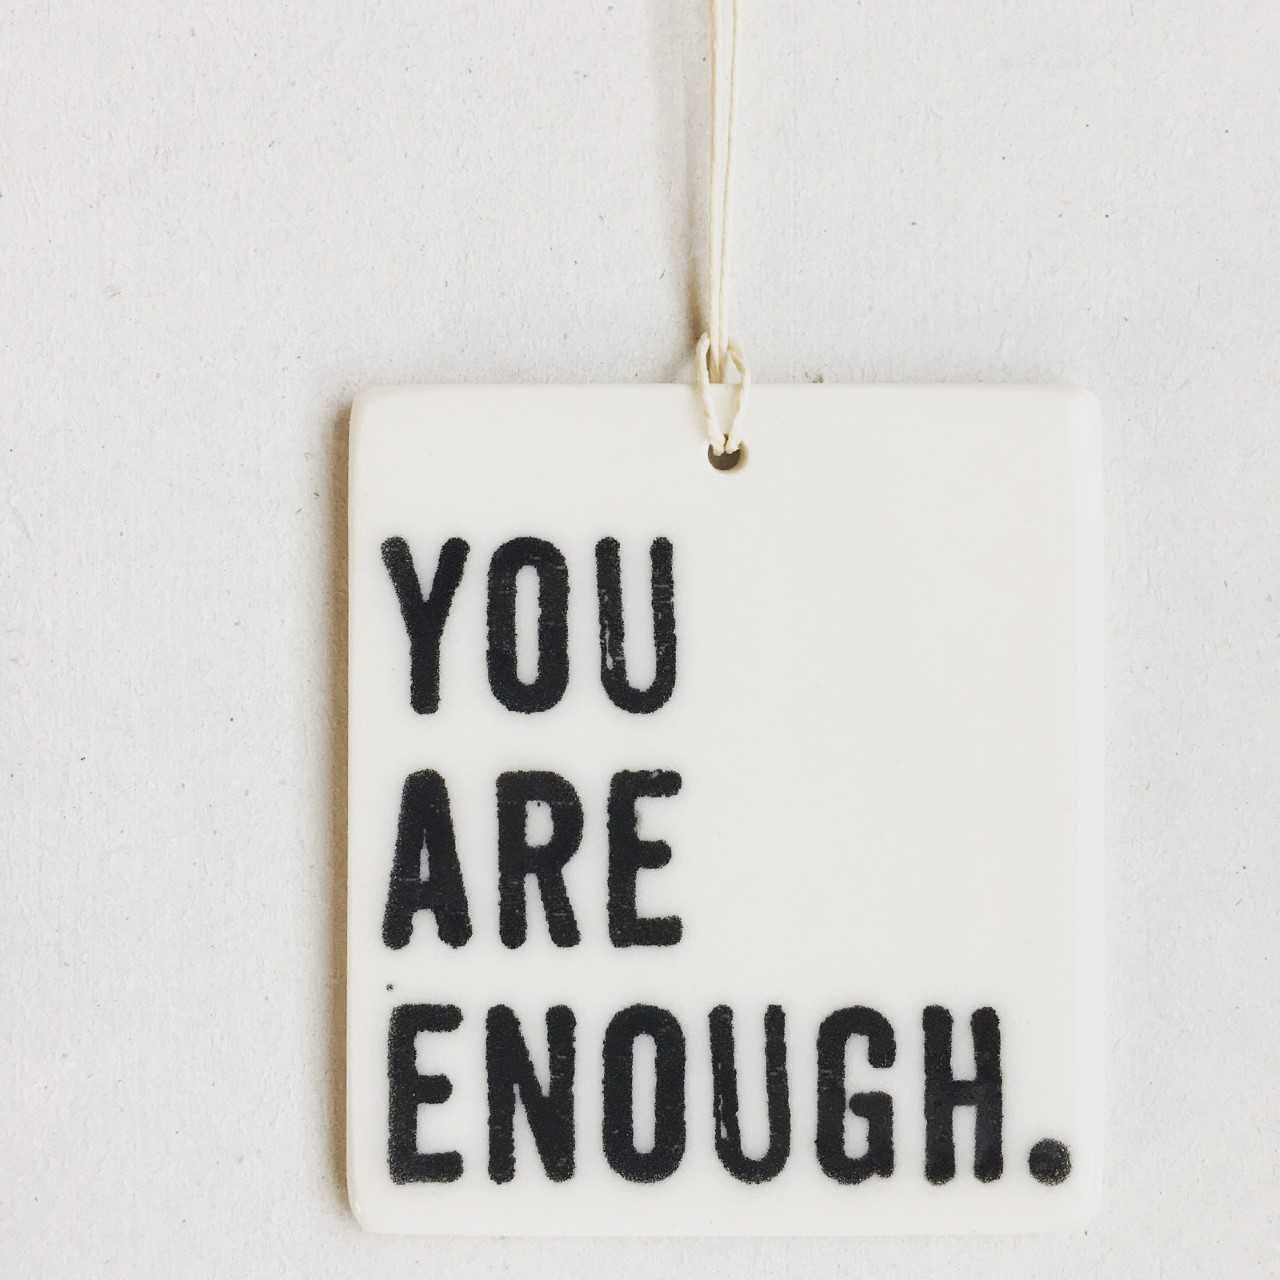 you are enough | ceramic wall tag | ceramic wall art | meaningful gift | self love | self care | daily affirmation | daily reminder